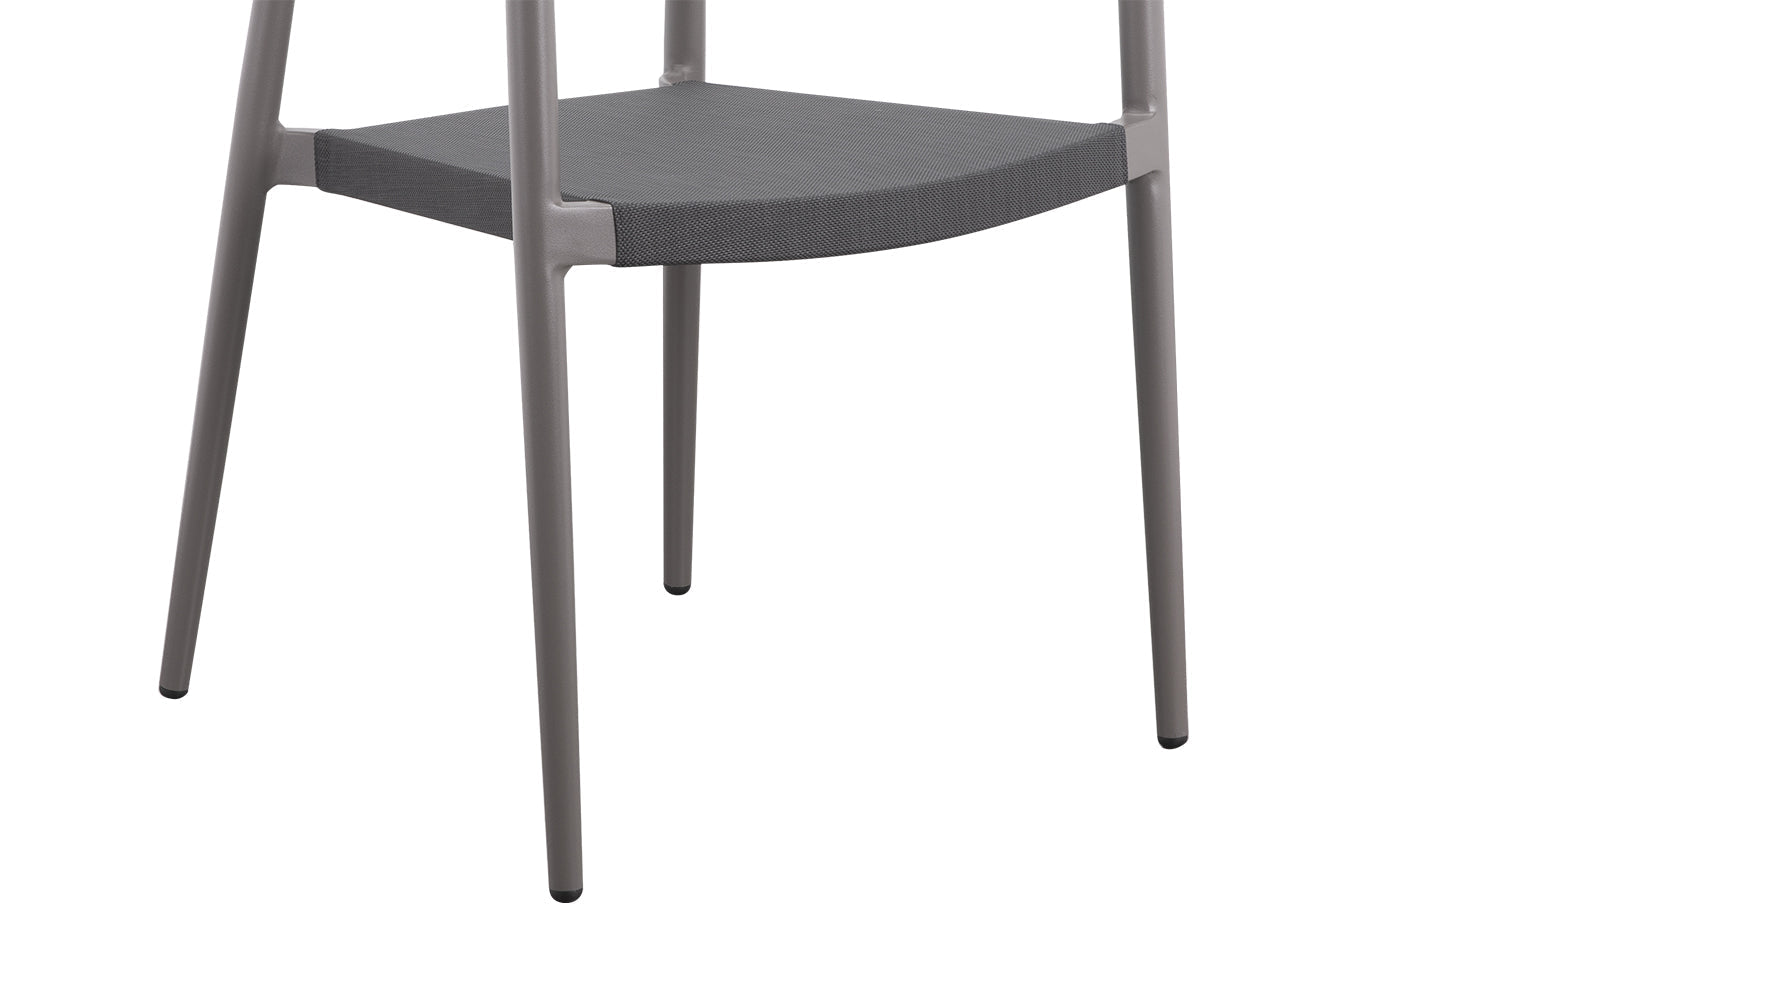 Best Of Me Outdoor Dining Chair (Set of Two), Pewter - Image 8